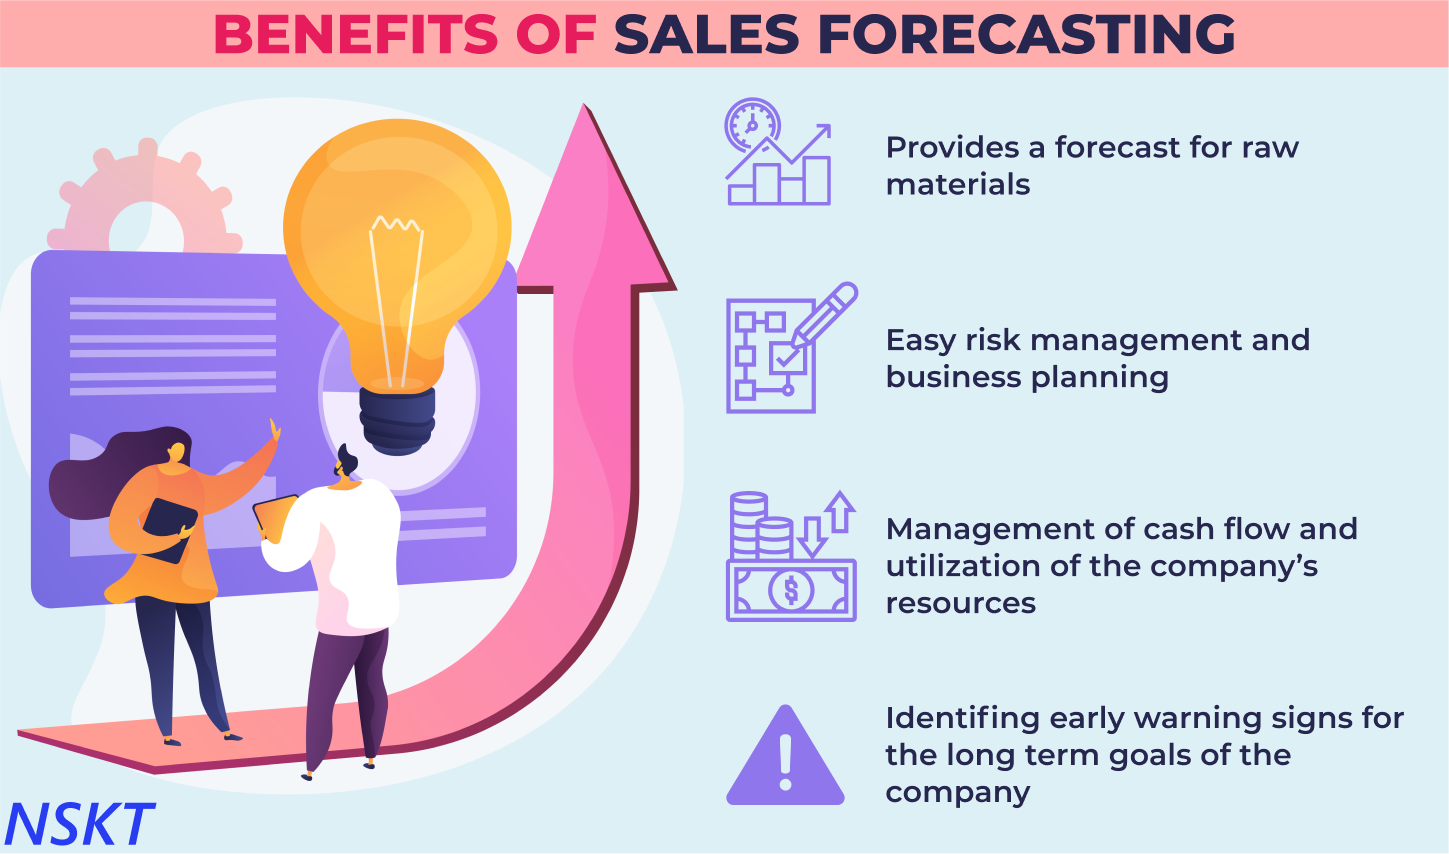 How is Sales Forecasting being done using artificial intelligence